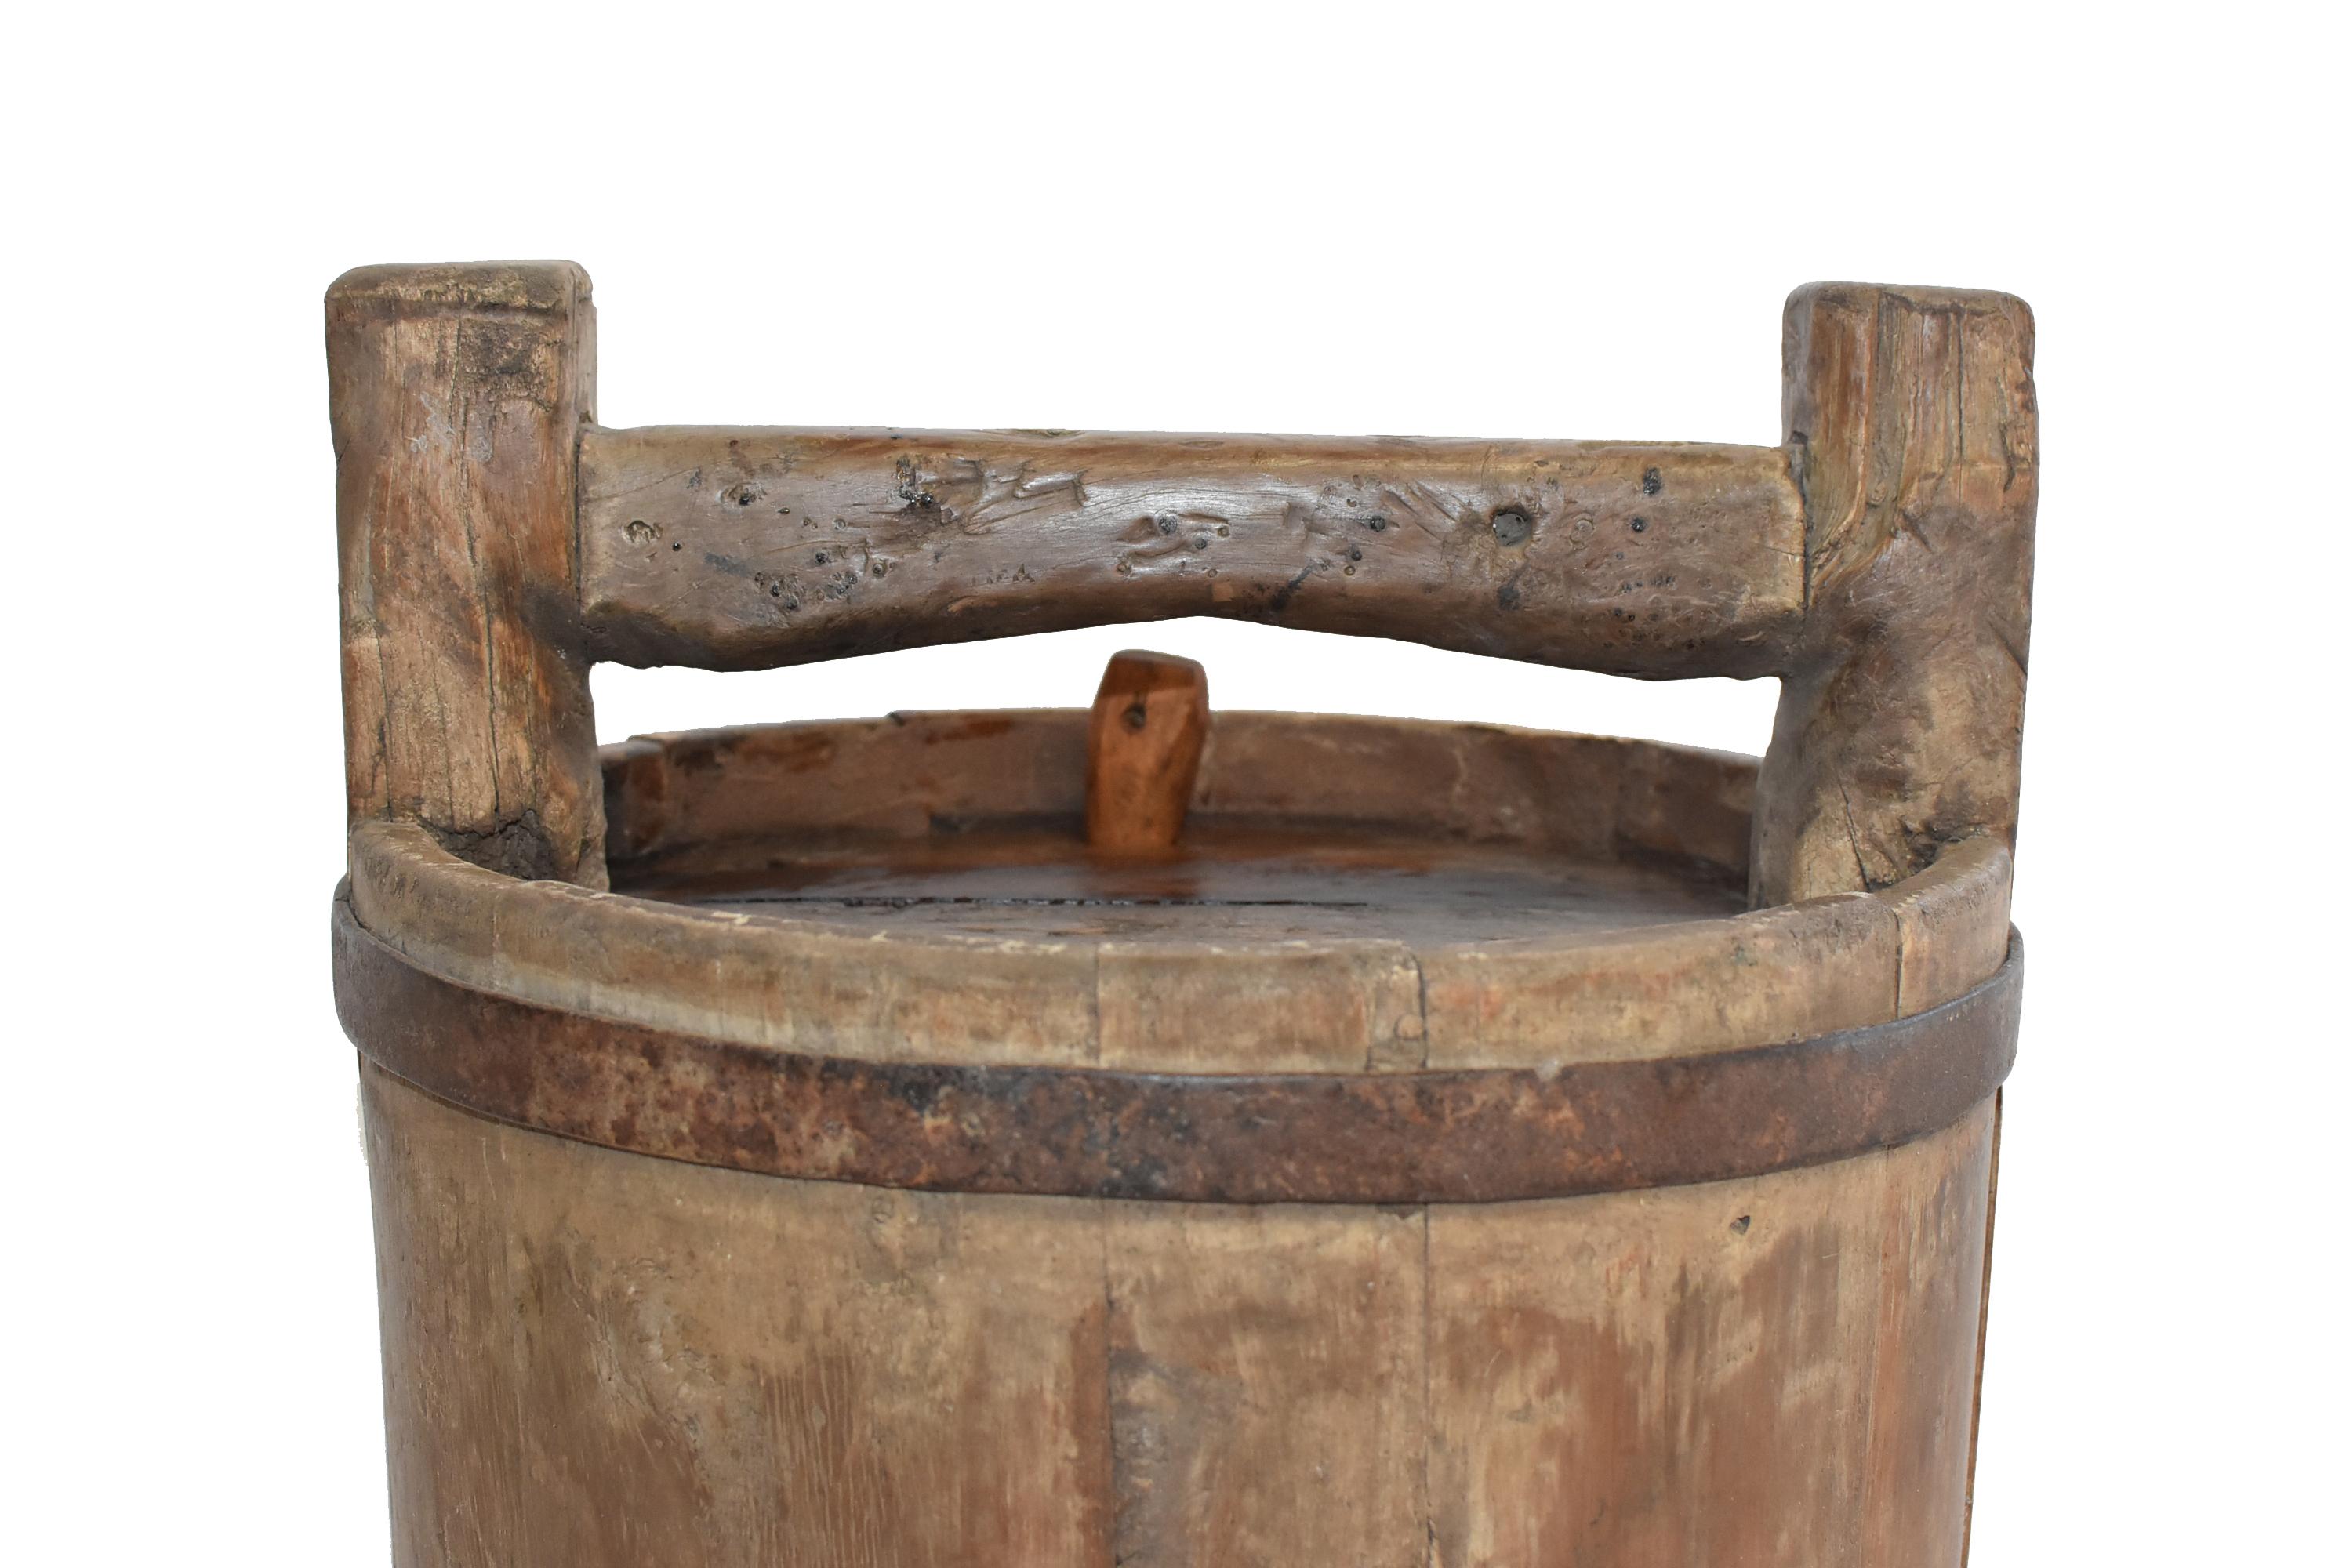 Chinese Antique Jujube Wine Barrel For Sale